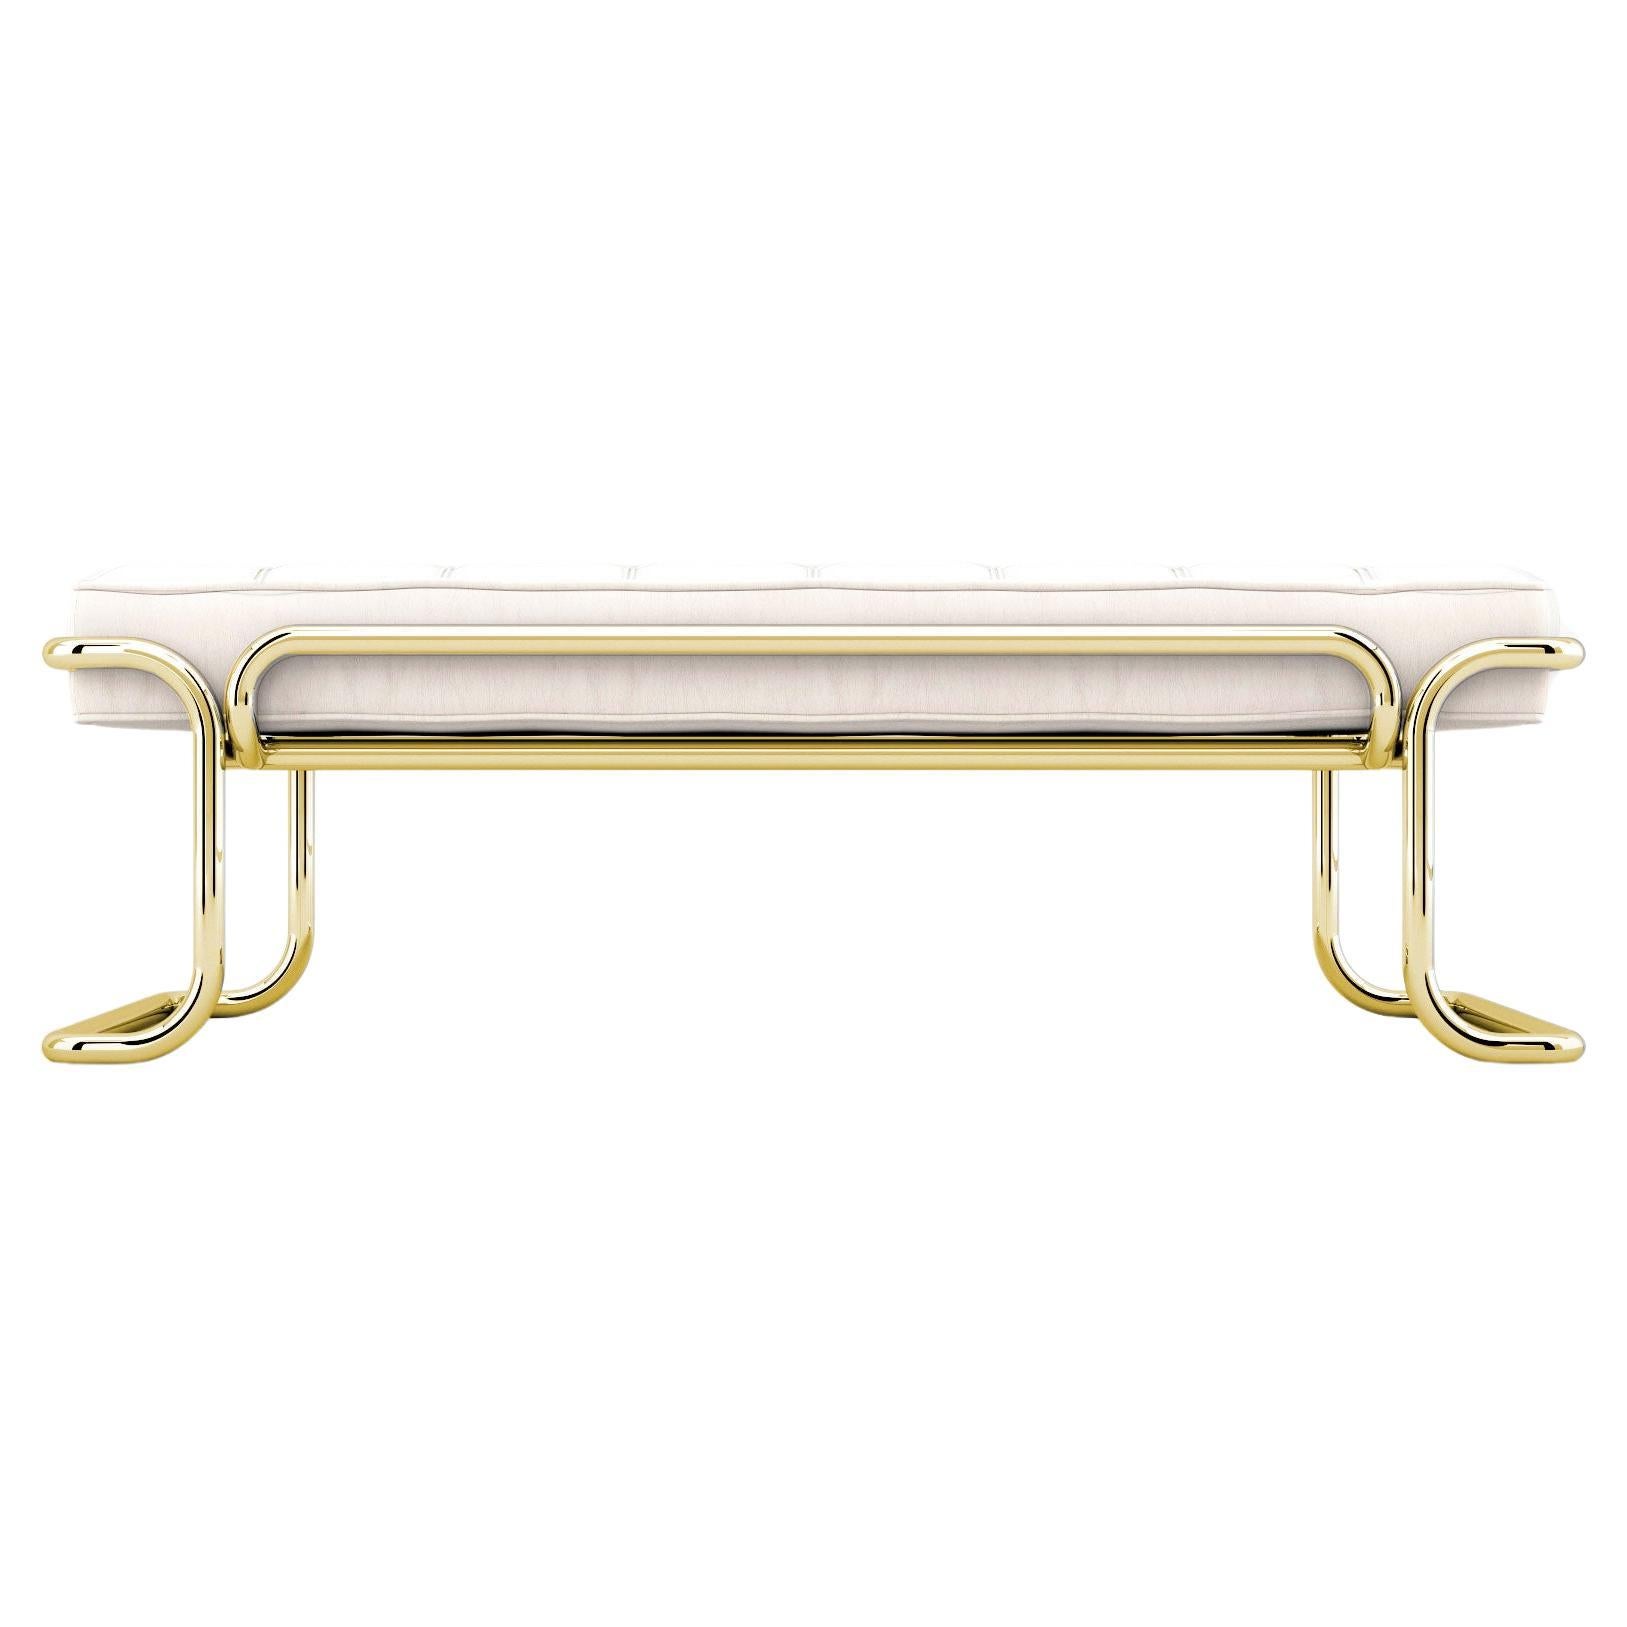 Lotus Banquette - Modern White Leather Sofa with Brass Legs